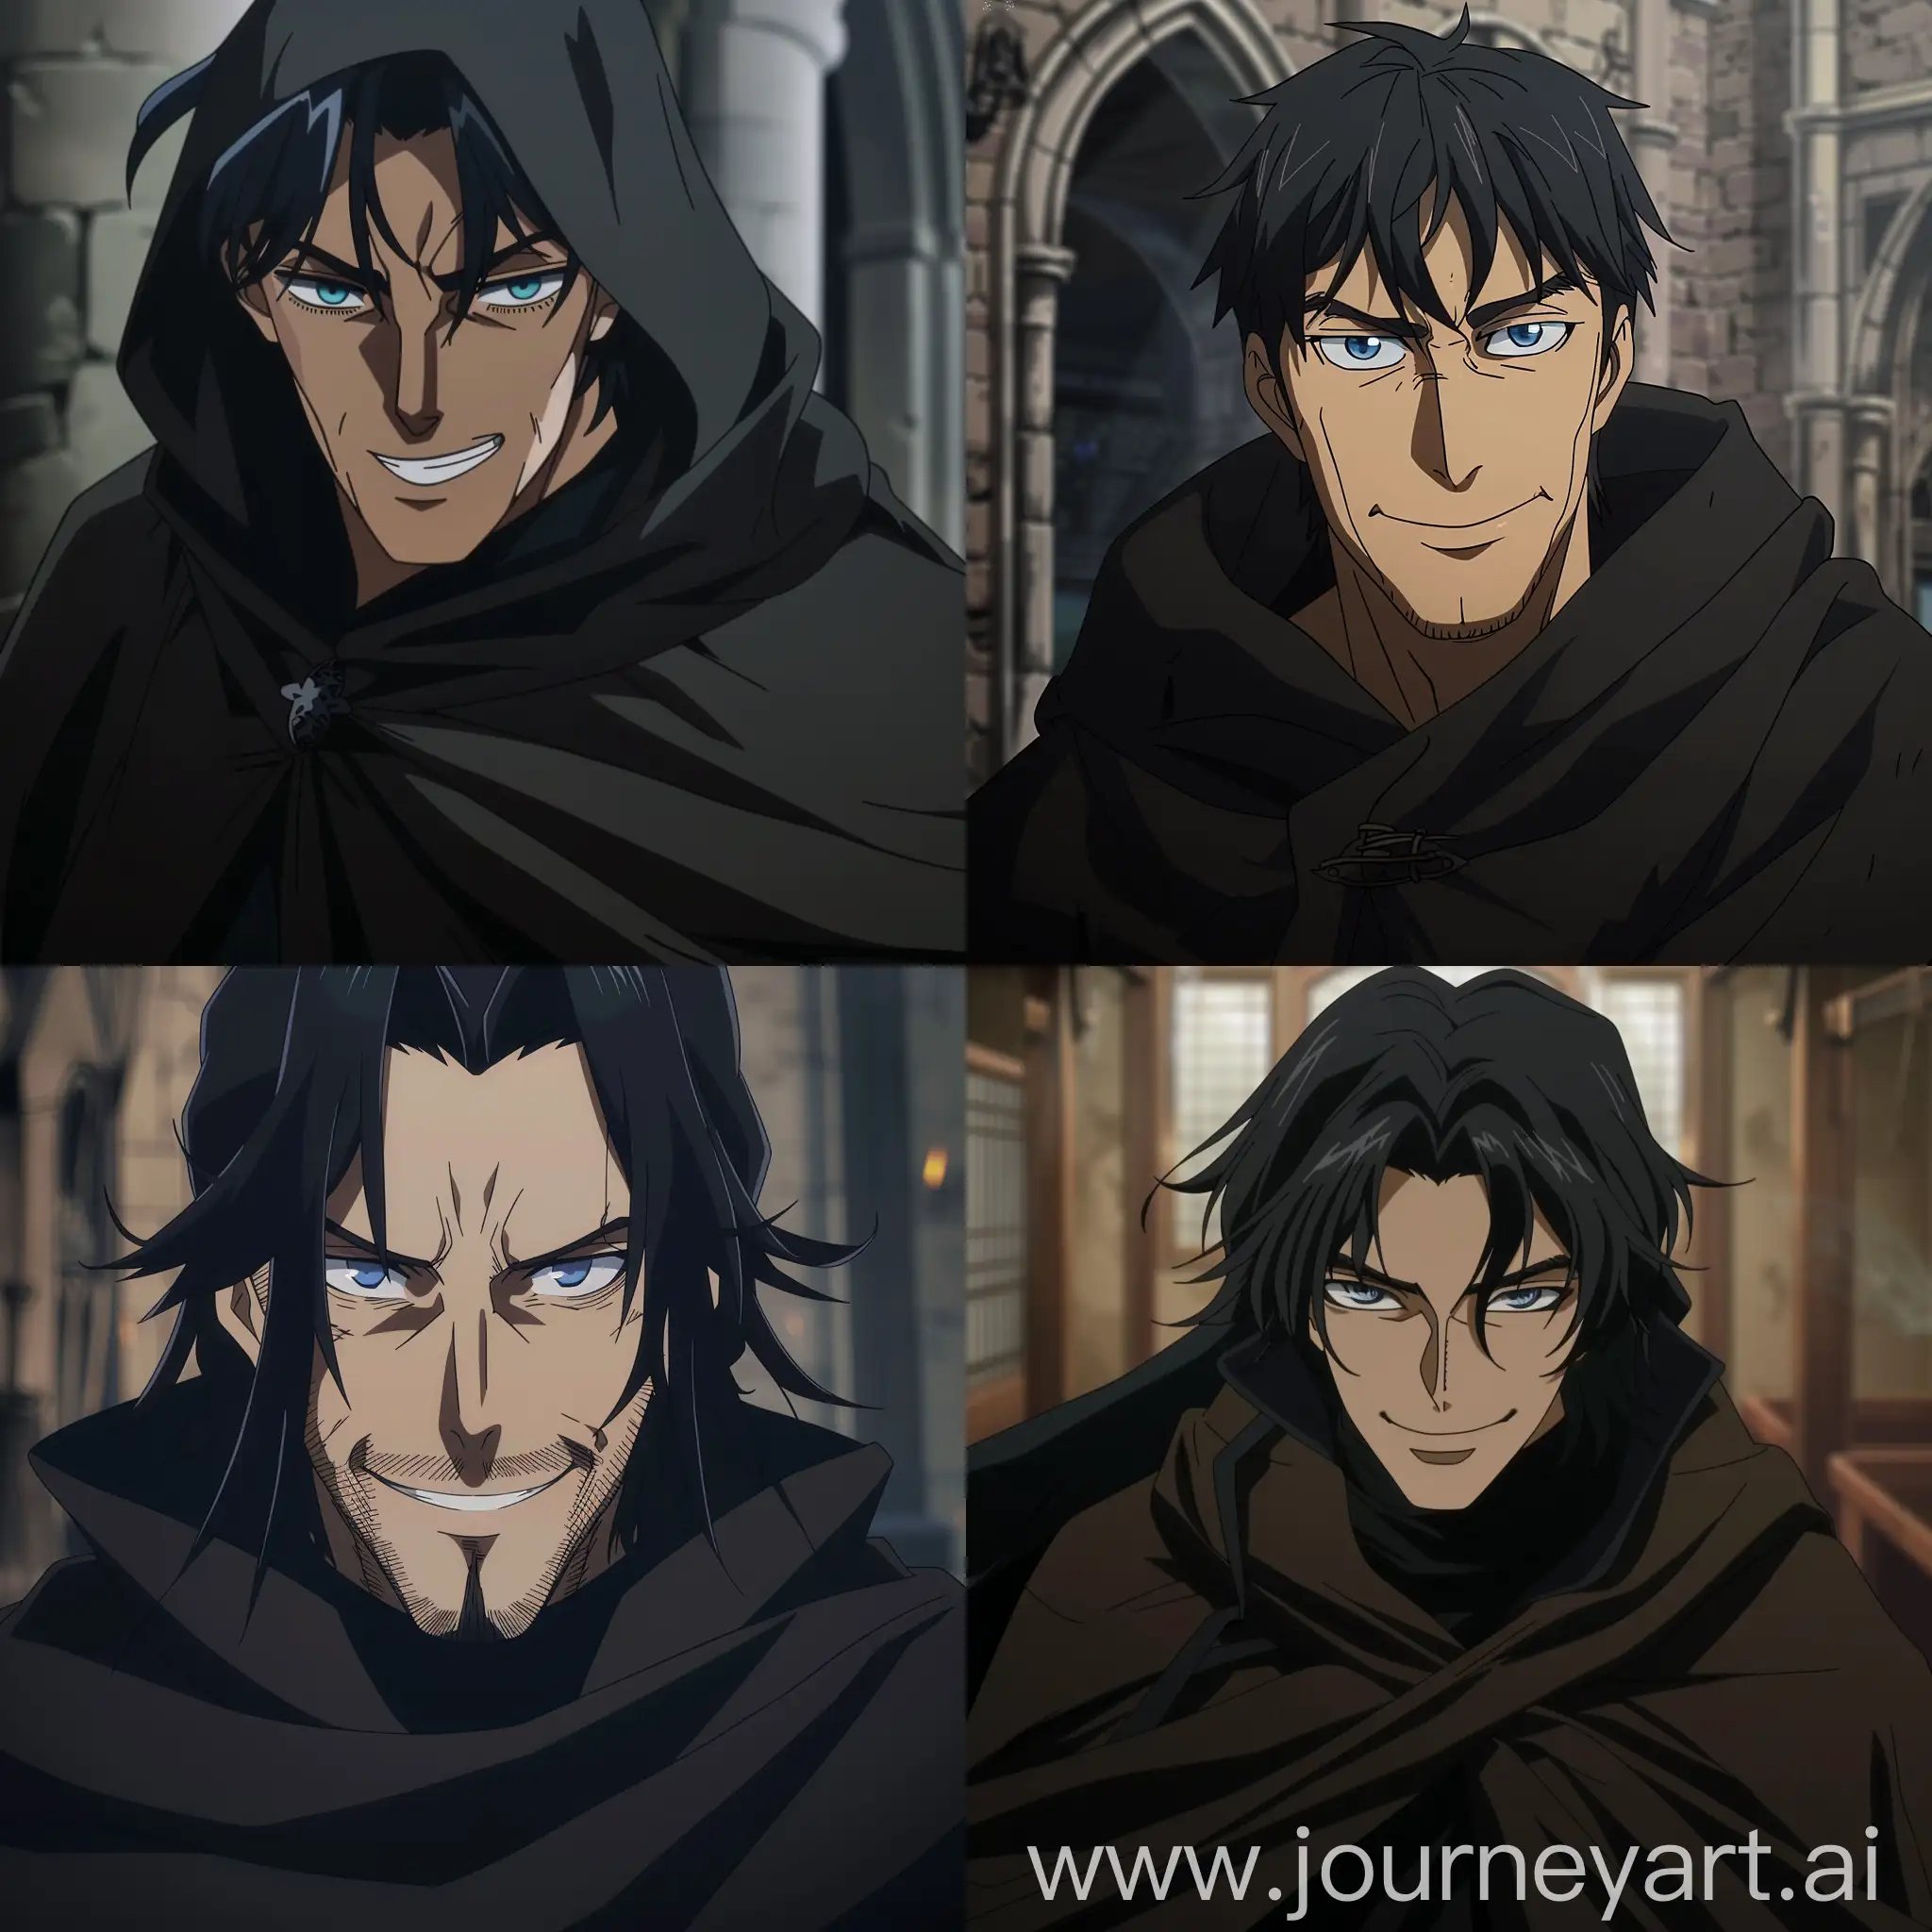 Mysterious-Man-with-Black-Hair-and-Blue-Eyes-in-Anime-Style